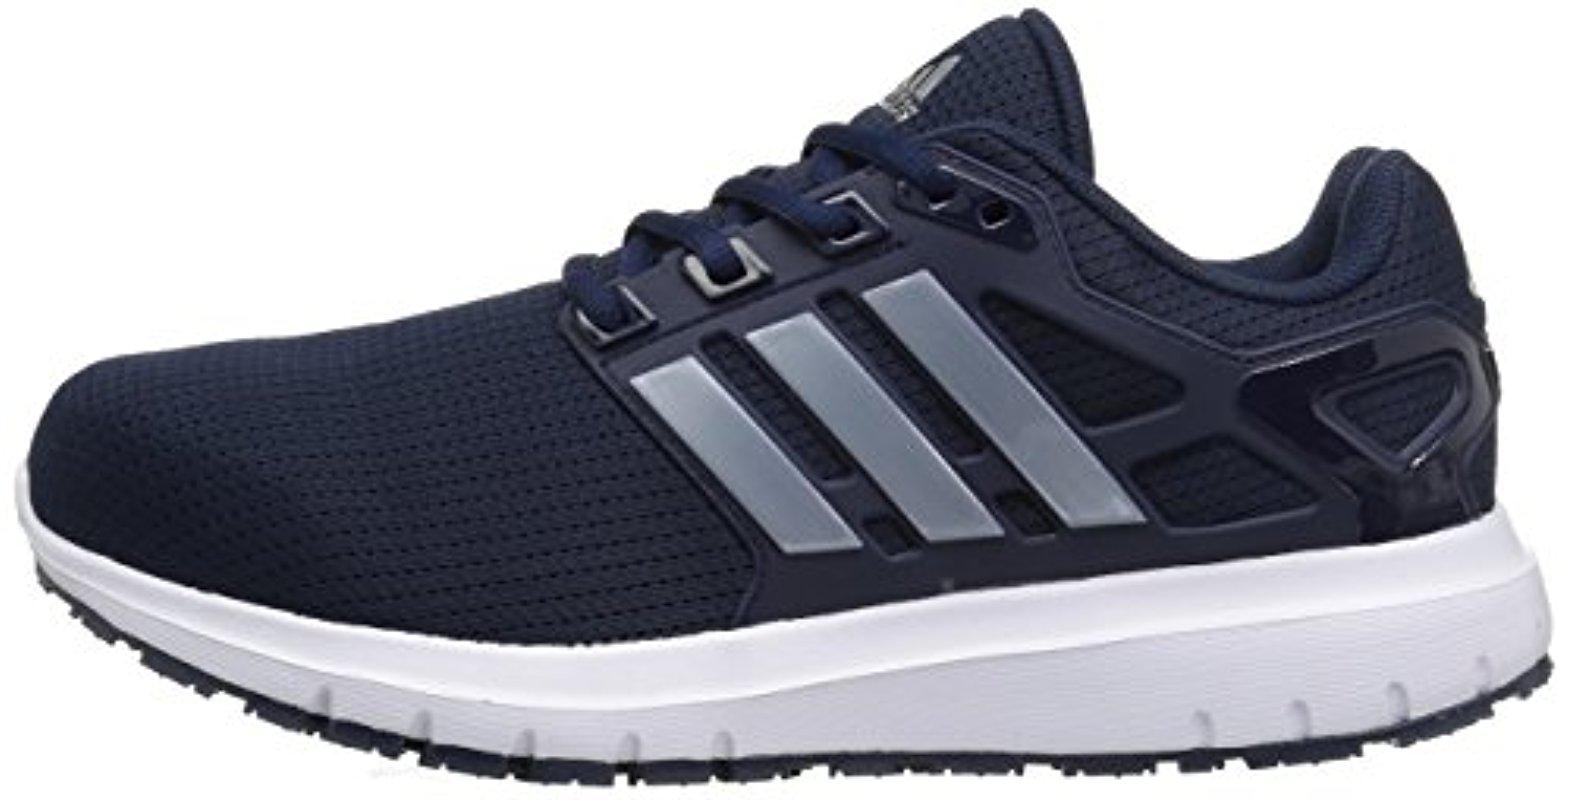 adidas Cloud Wide M Running Shoe in Blue for Men - Lyst